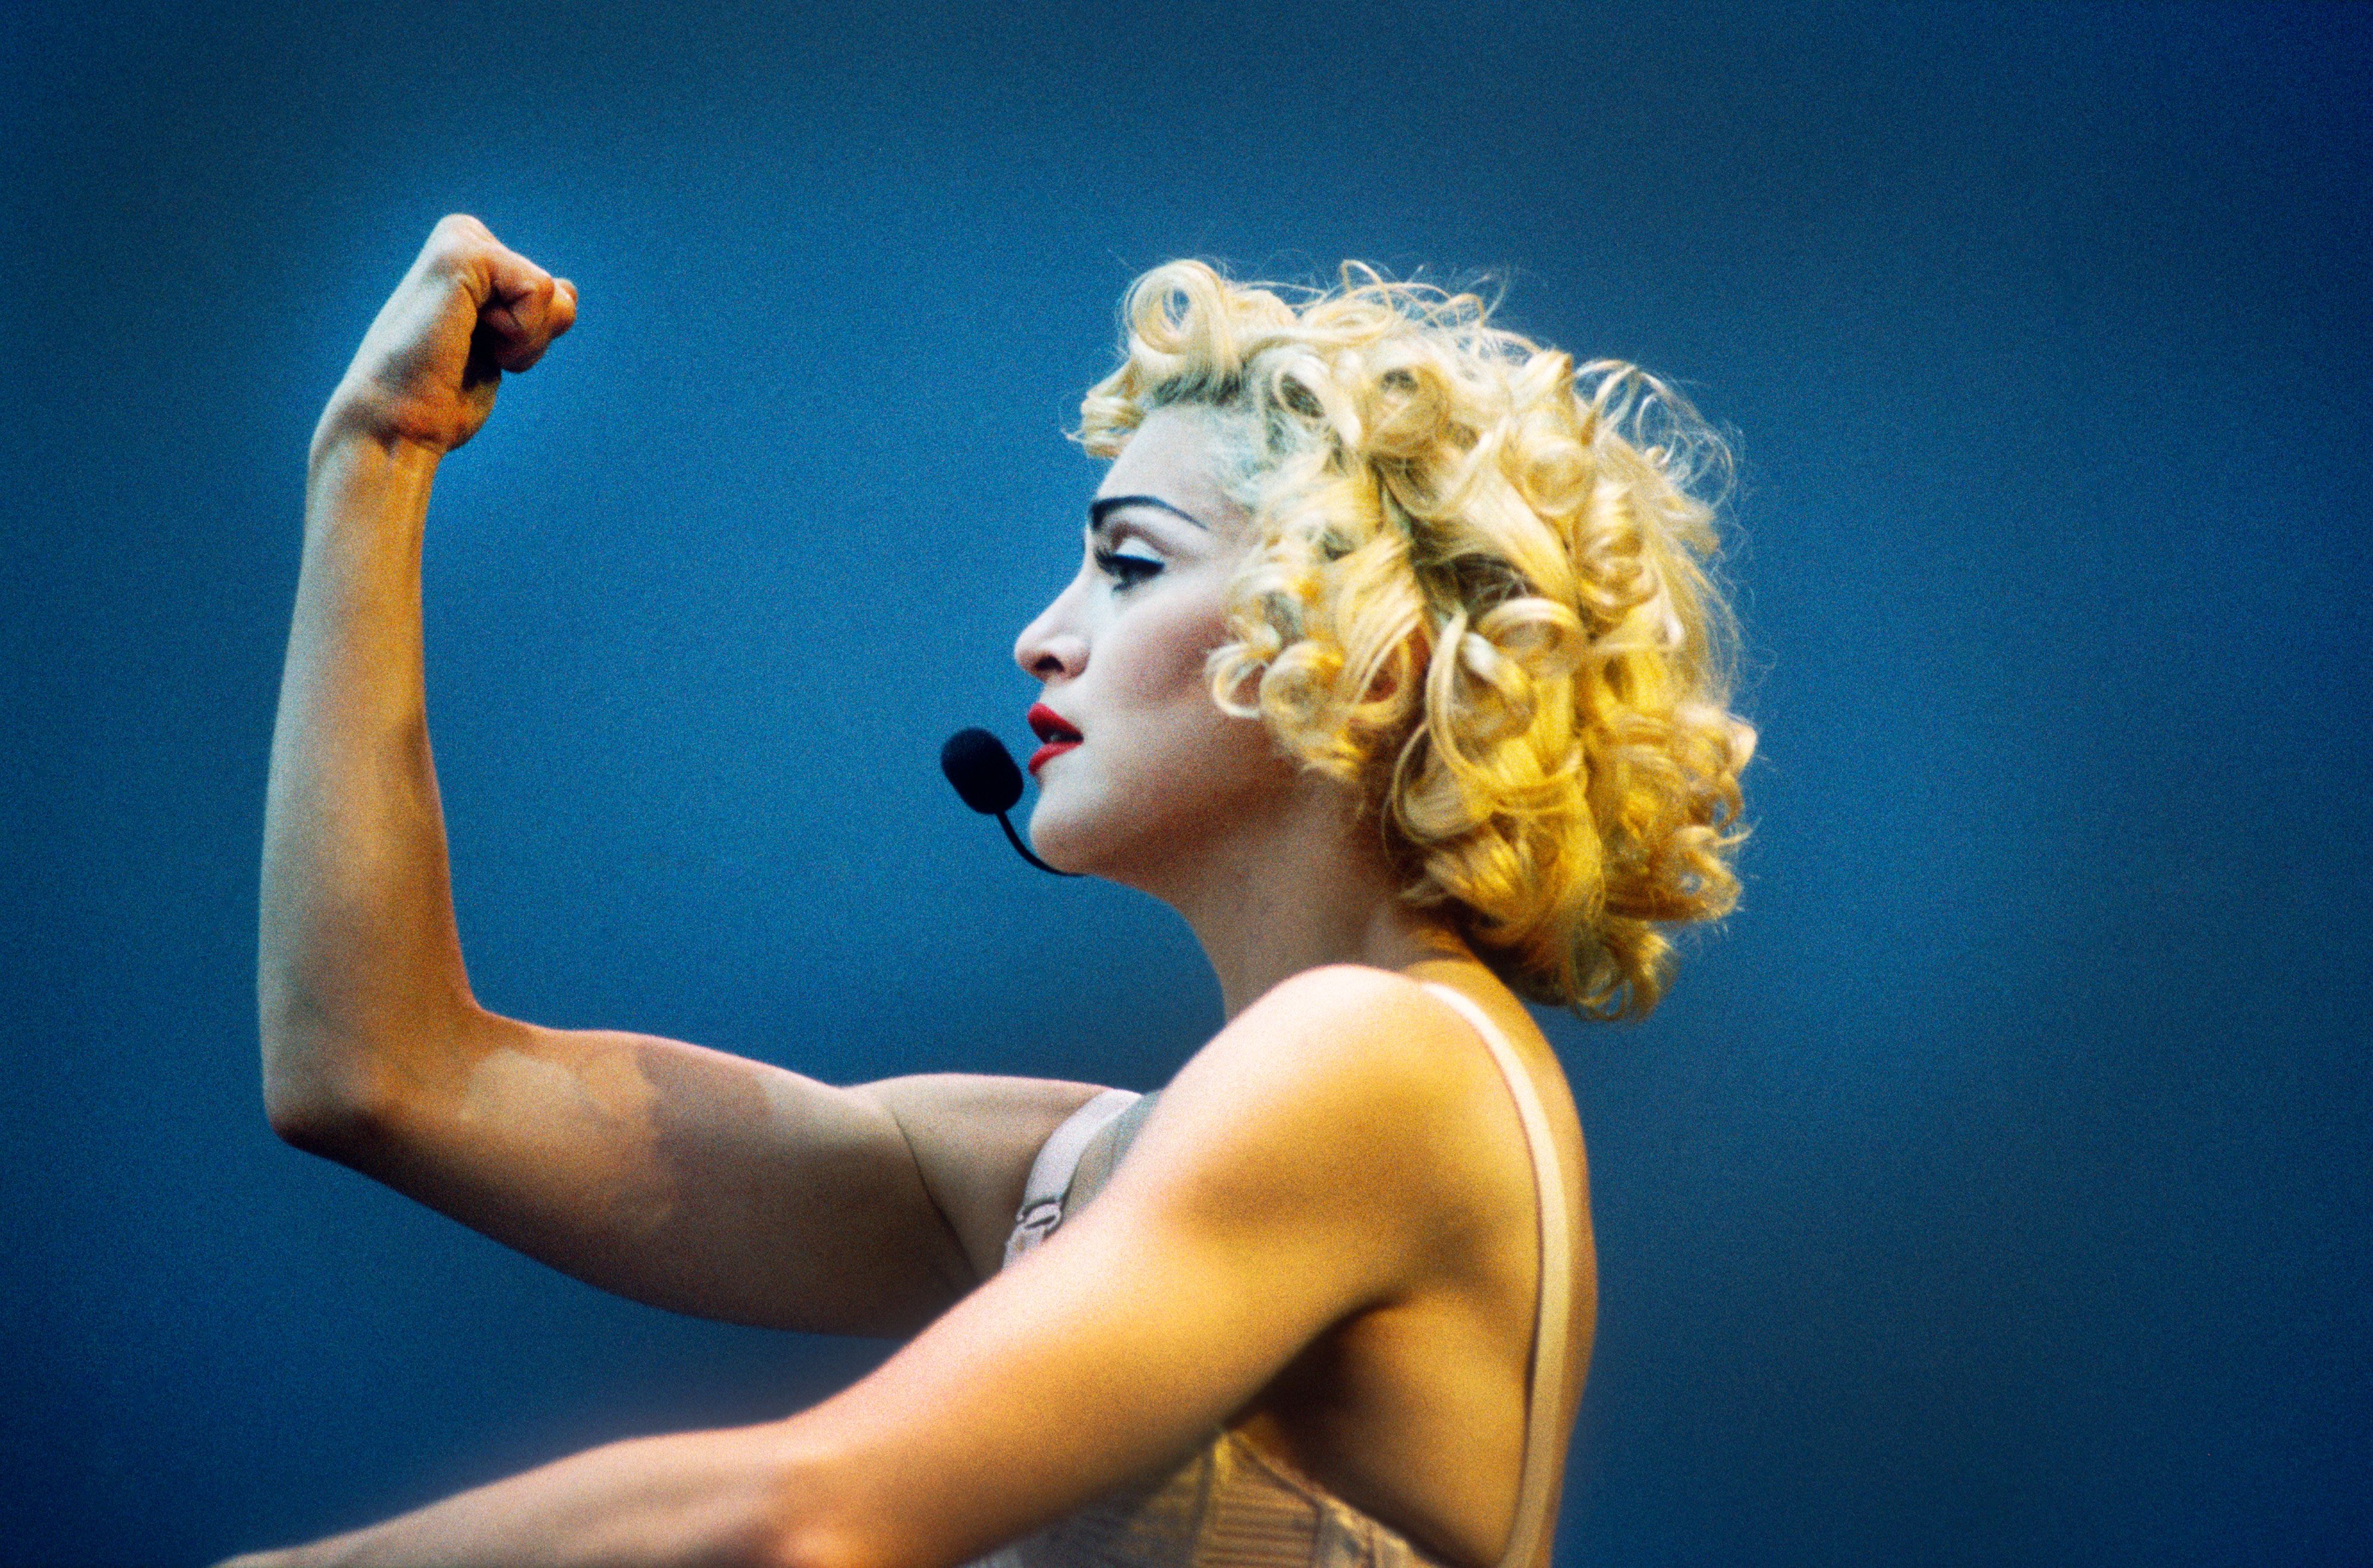 Playing Truth Or Dare With Brother Incest - The Oral History of Madonna's 'Truth or Dare'